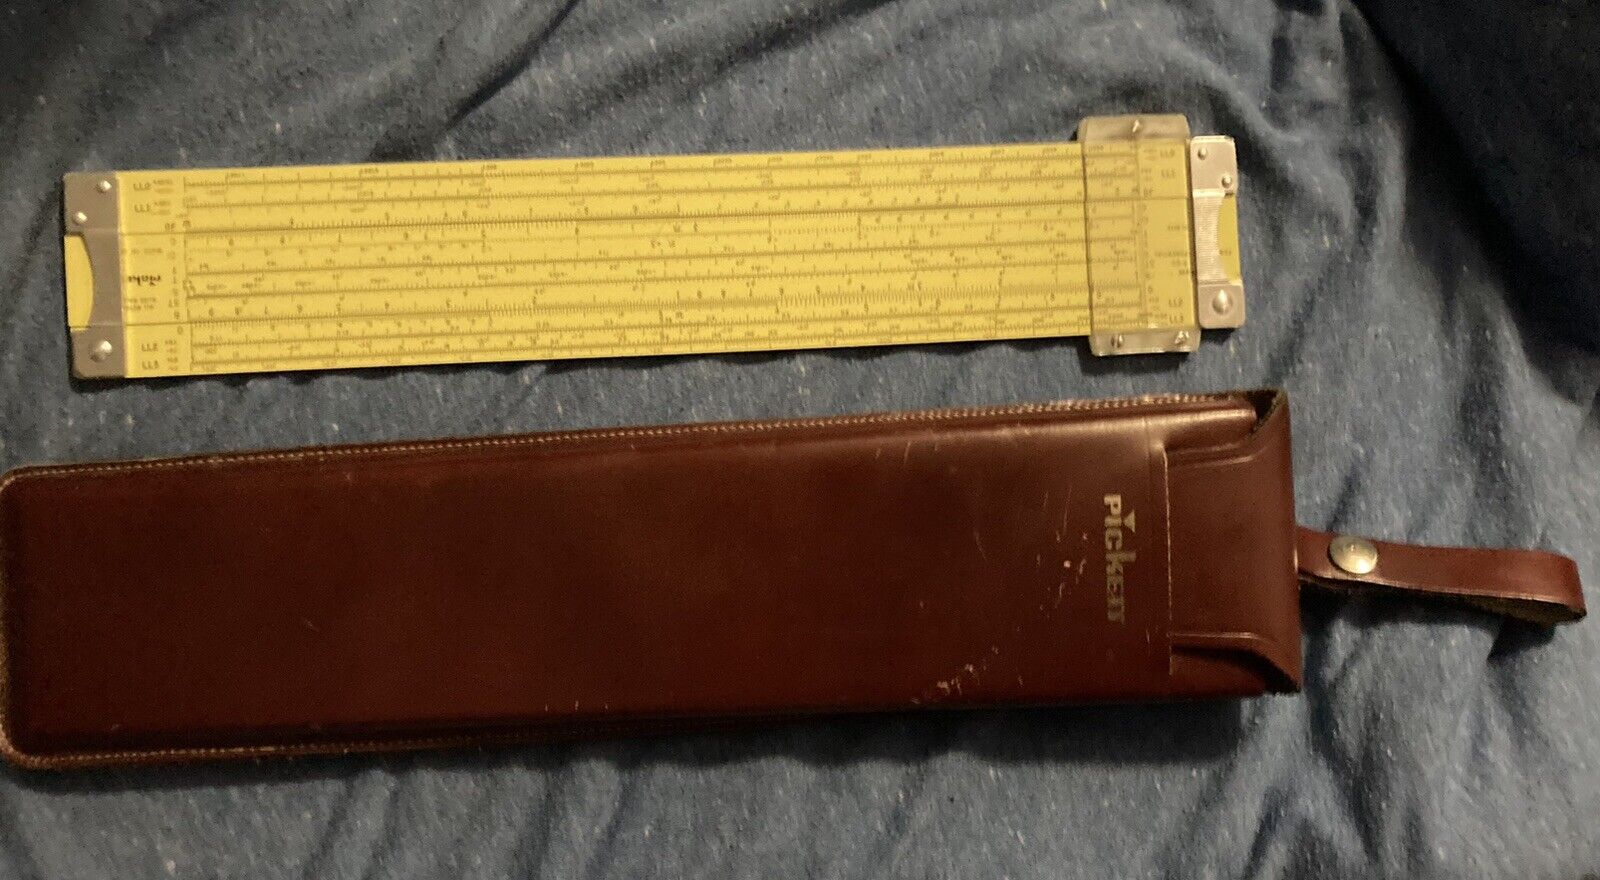 Vintage Pickett Slide Rule N 3-ES with Leather Case © 1960 Leather Case W/clip